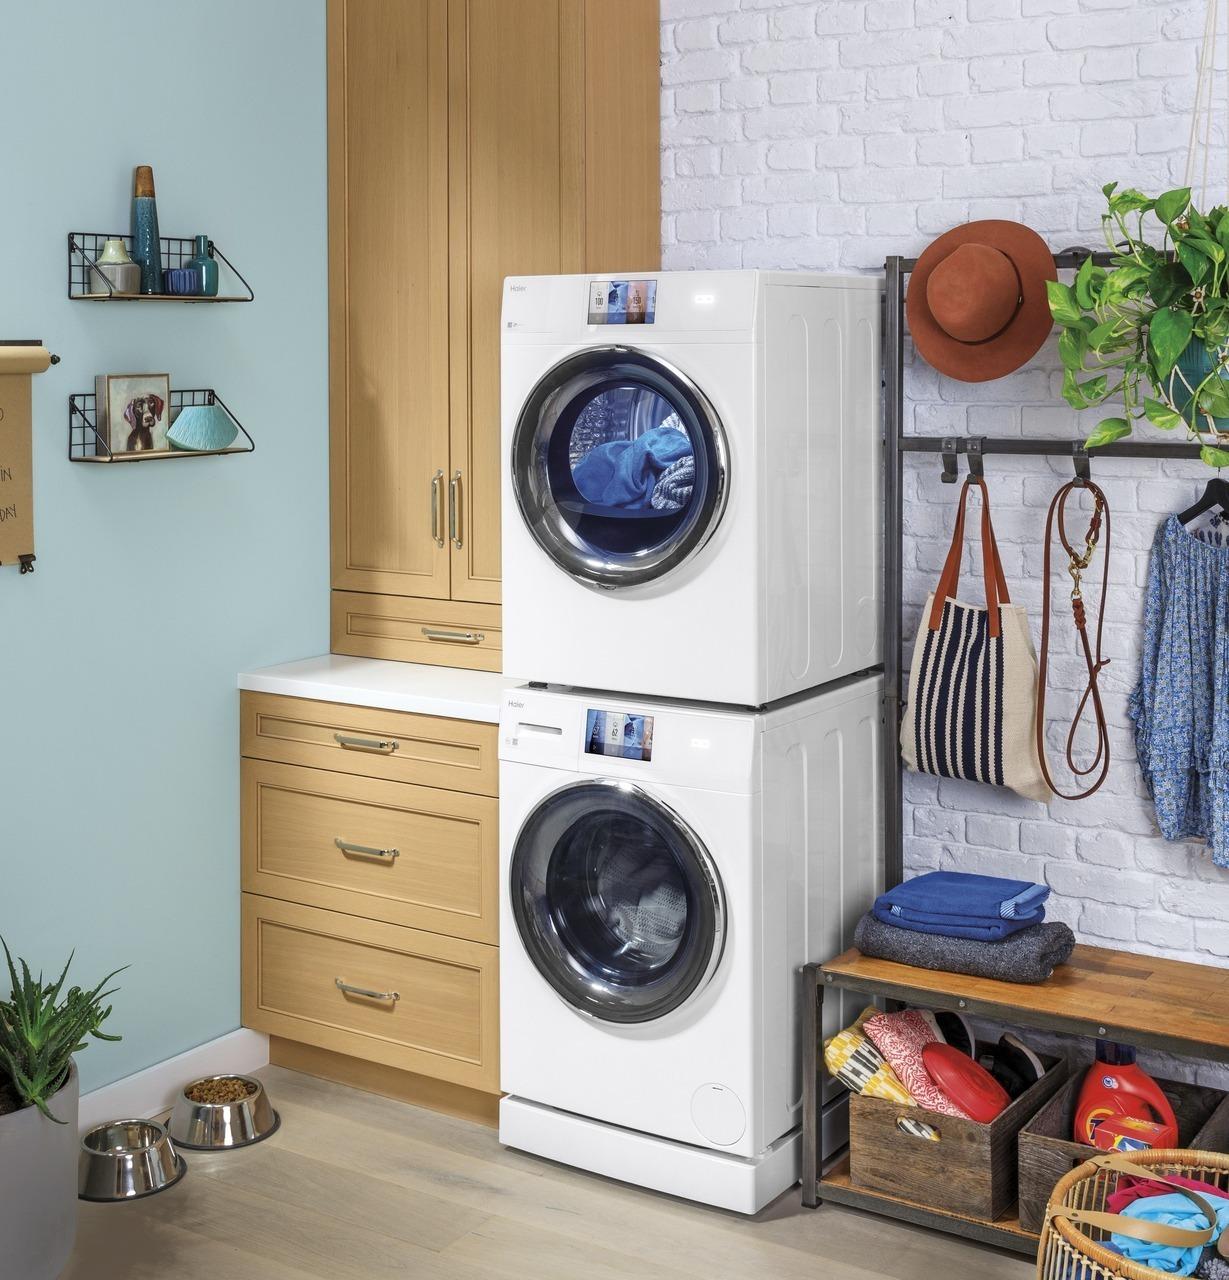 Haier ENERGY STAR® 2.4 Cu. Ft. Smart Frontload Washer